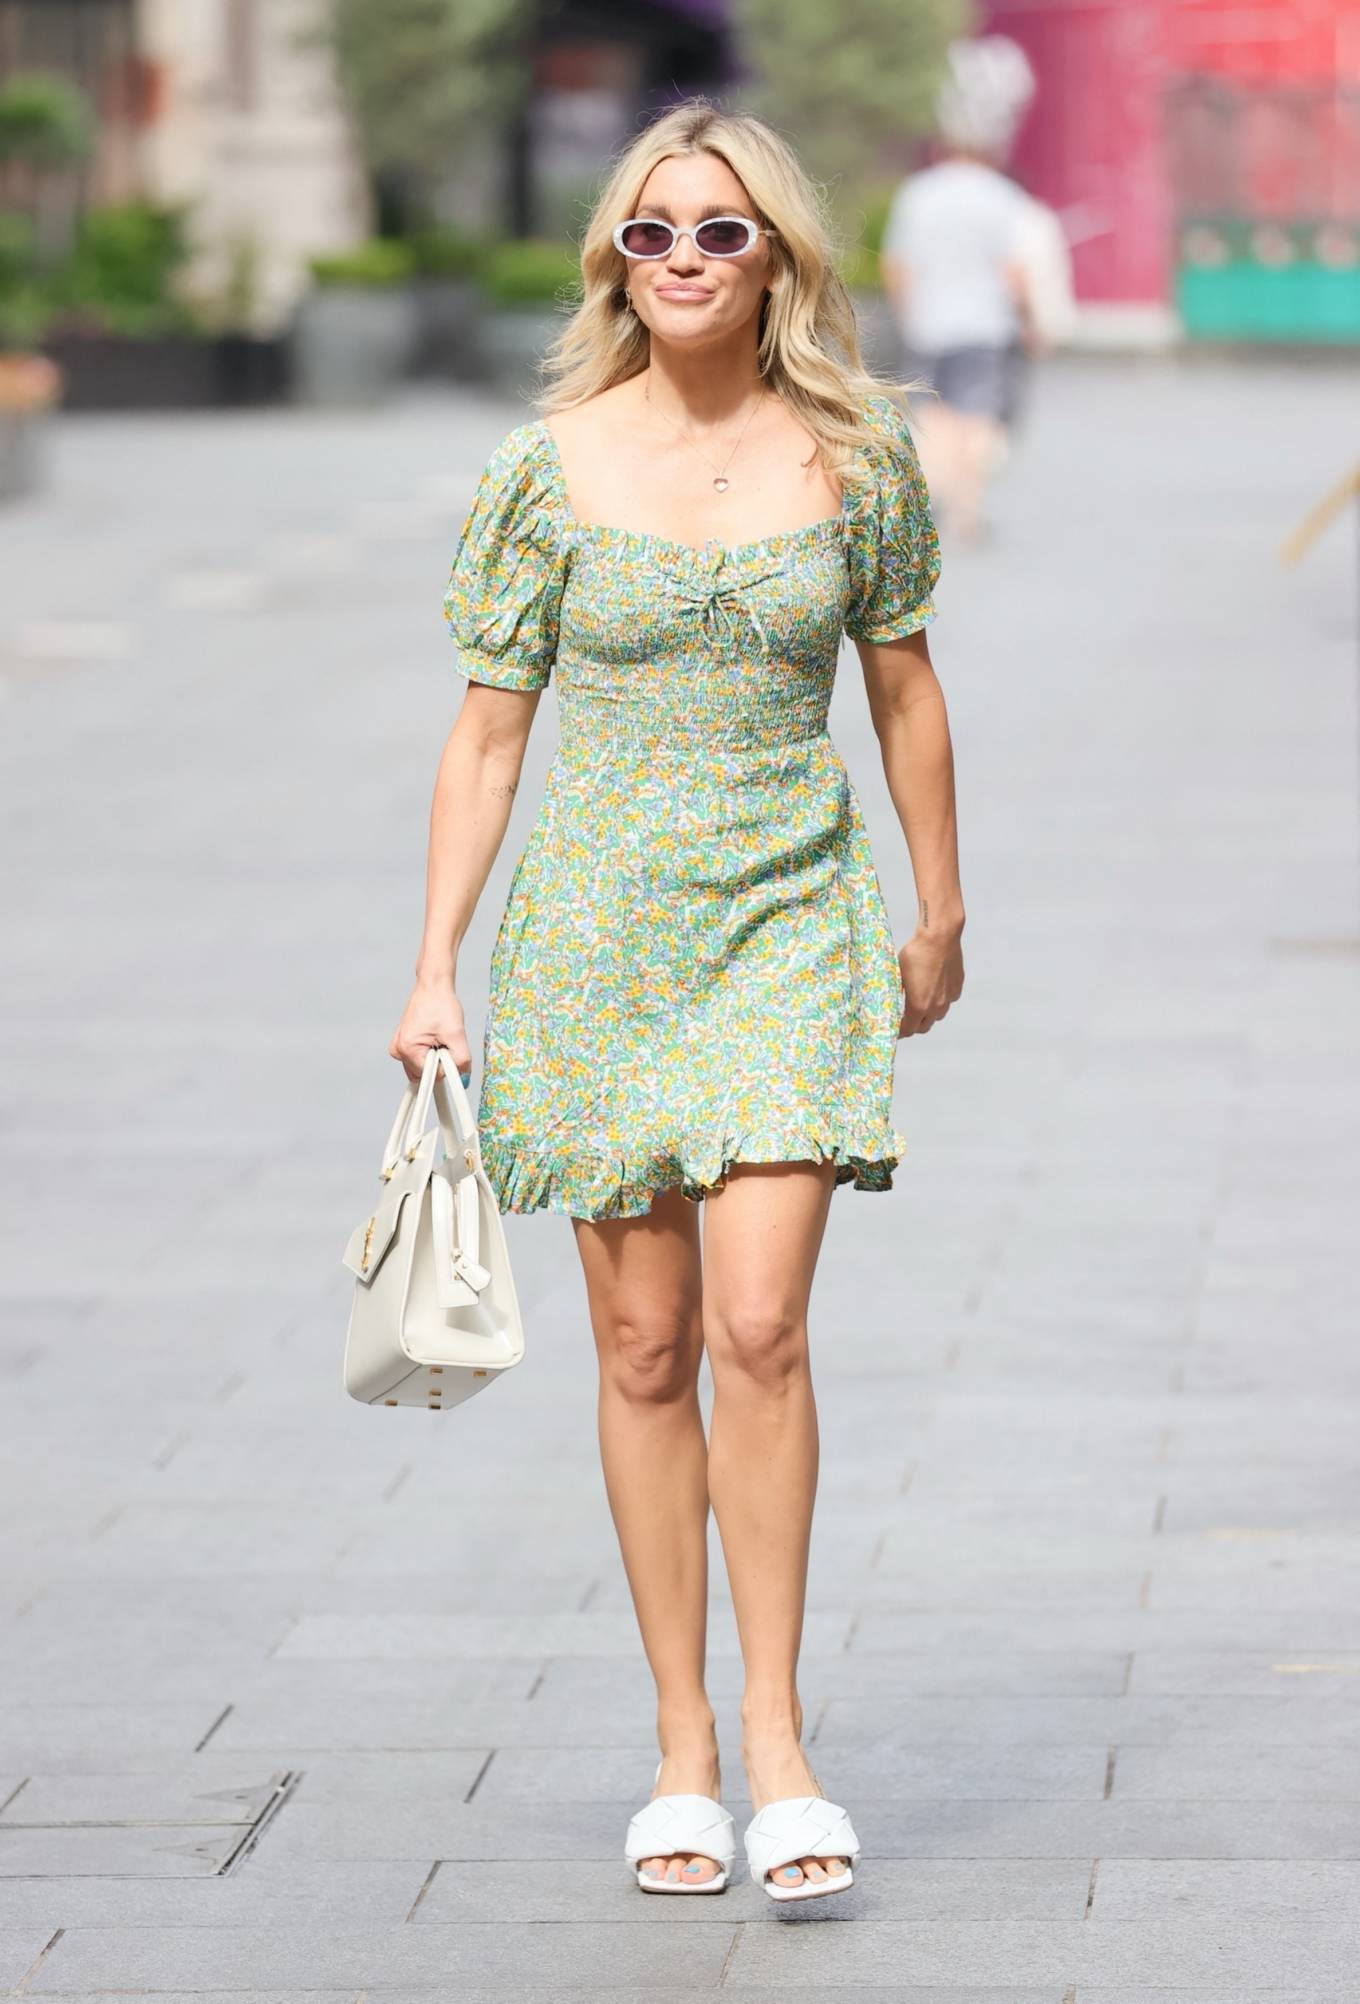 Ashley Roberts 2021 : Ashley Roberts – Seen at Heart radio in floaty floral mini dress in London-17